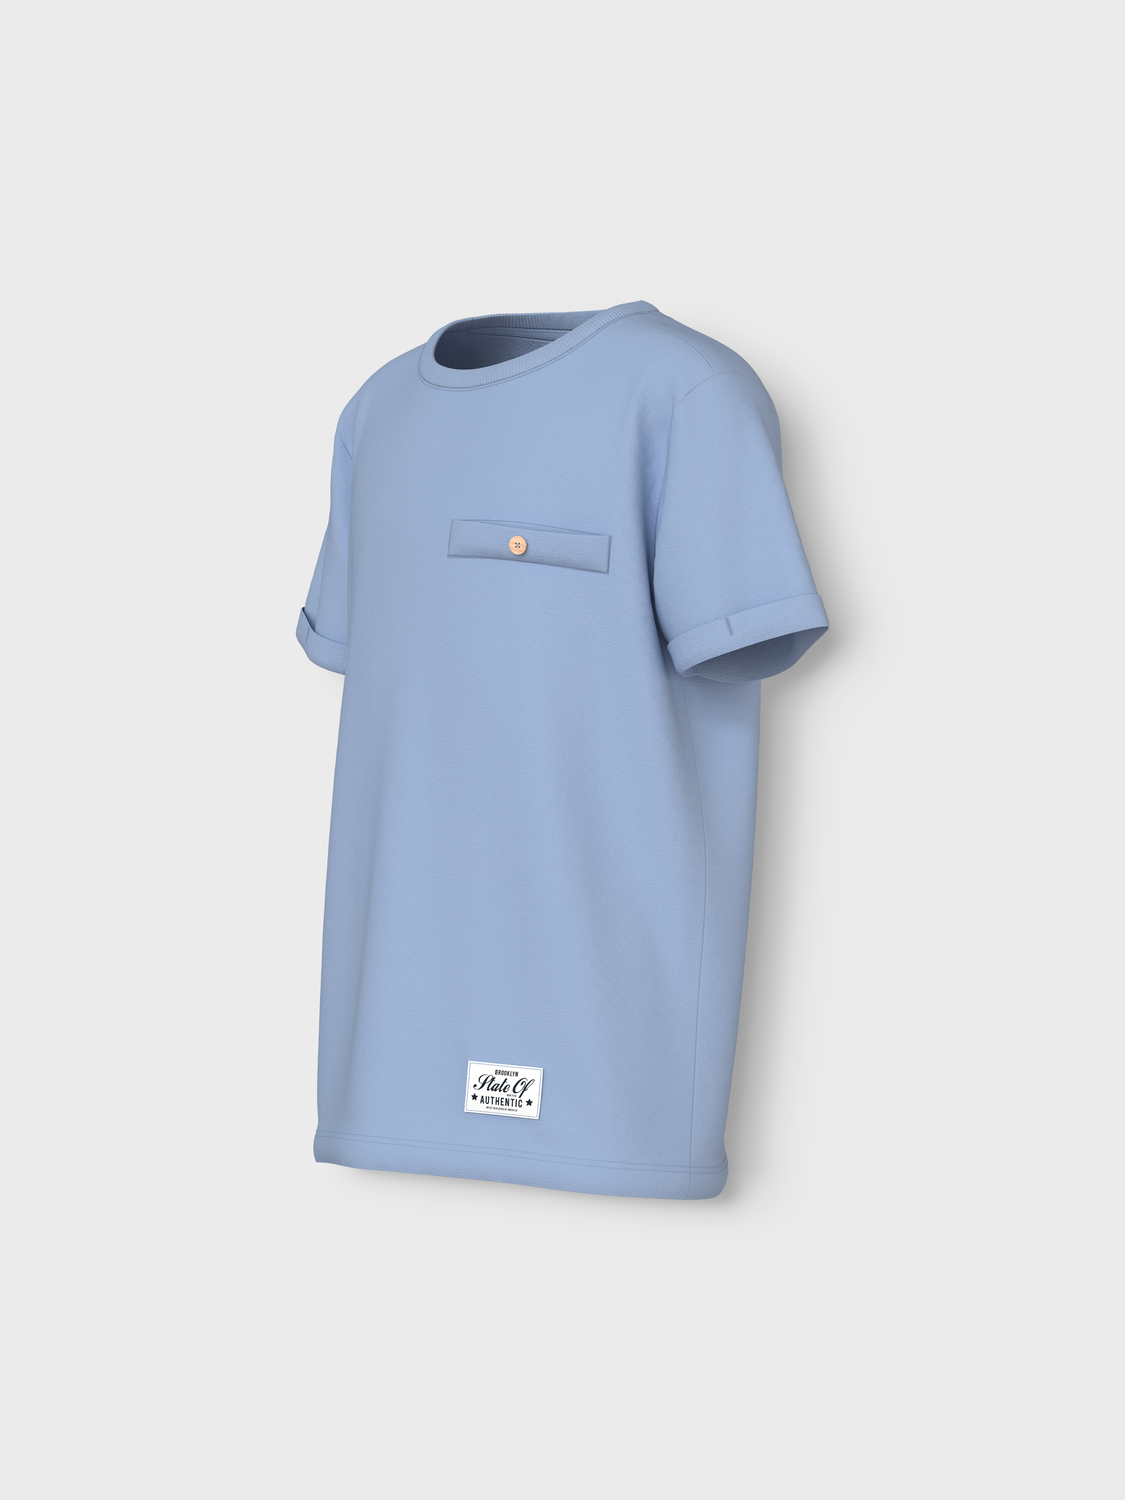 NKMVINCENT T-Shirts & Tops - Chambray Blue